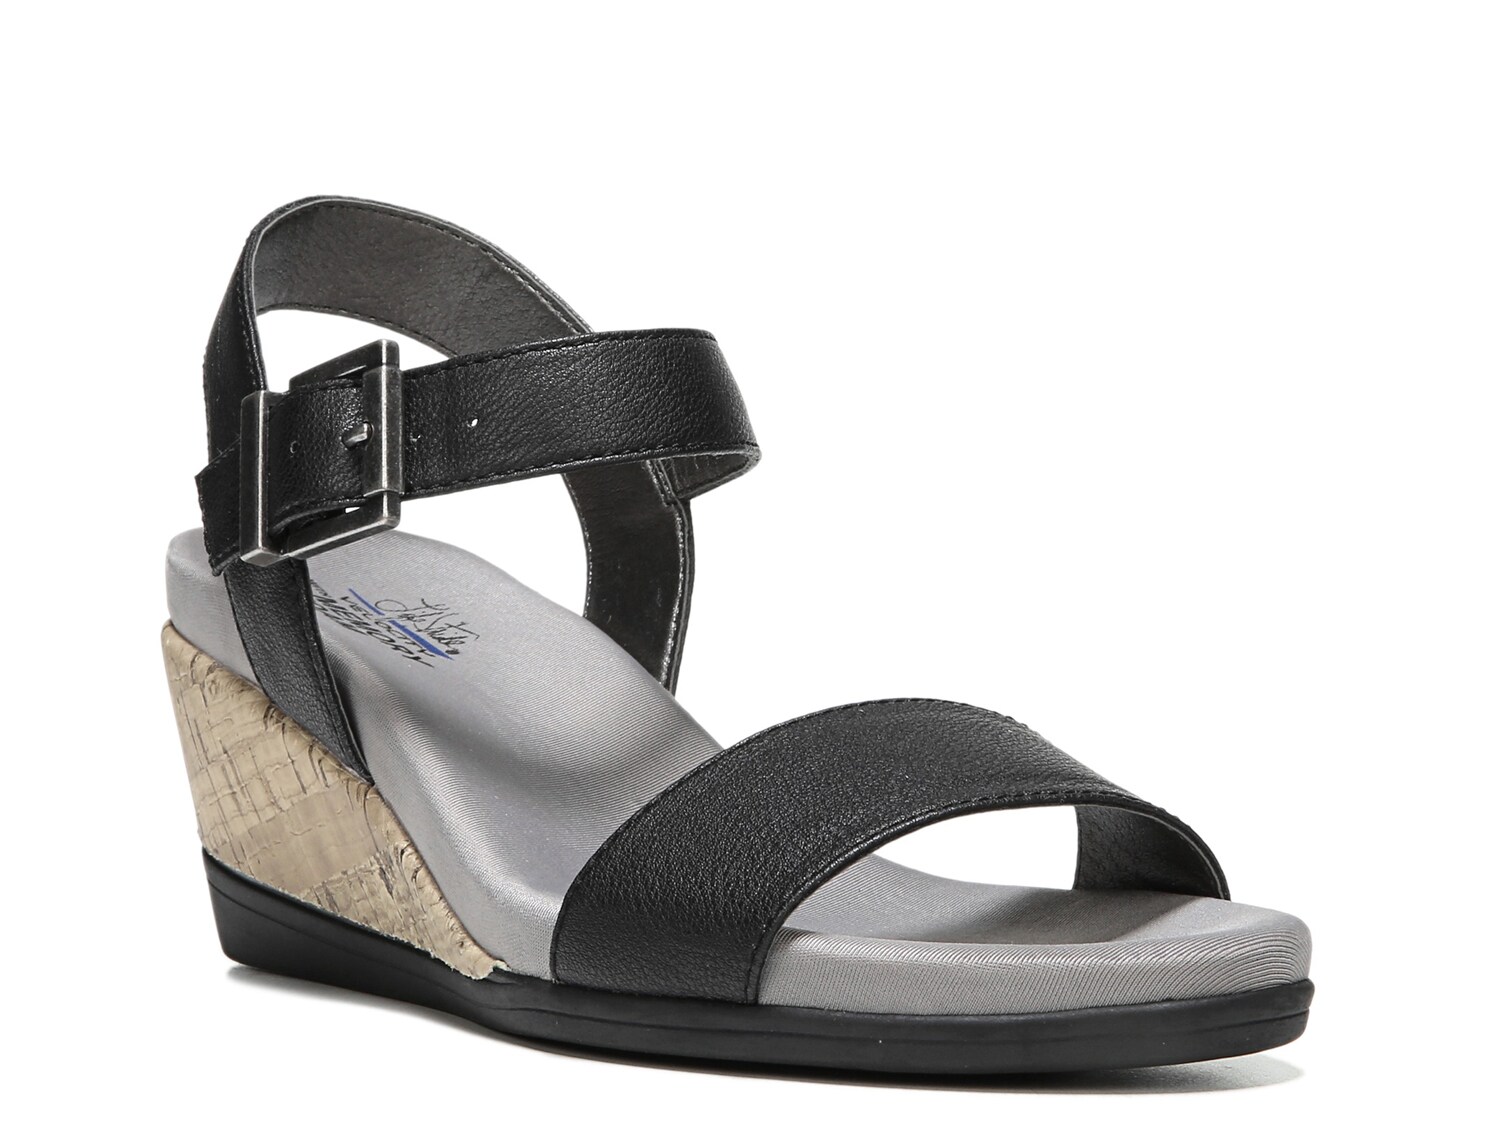 LifeStride Tanglo Wedge Sandal - Free Shipping | DSW